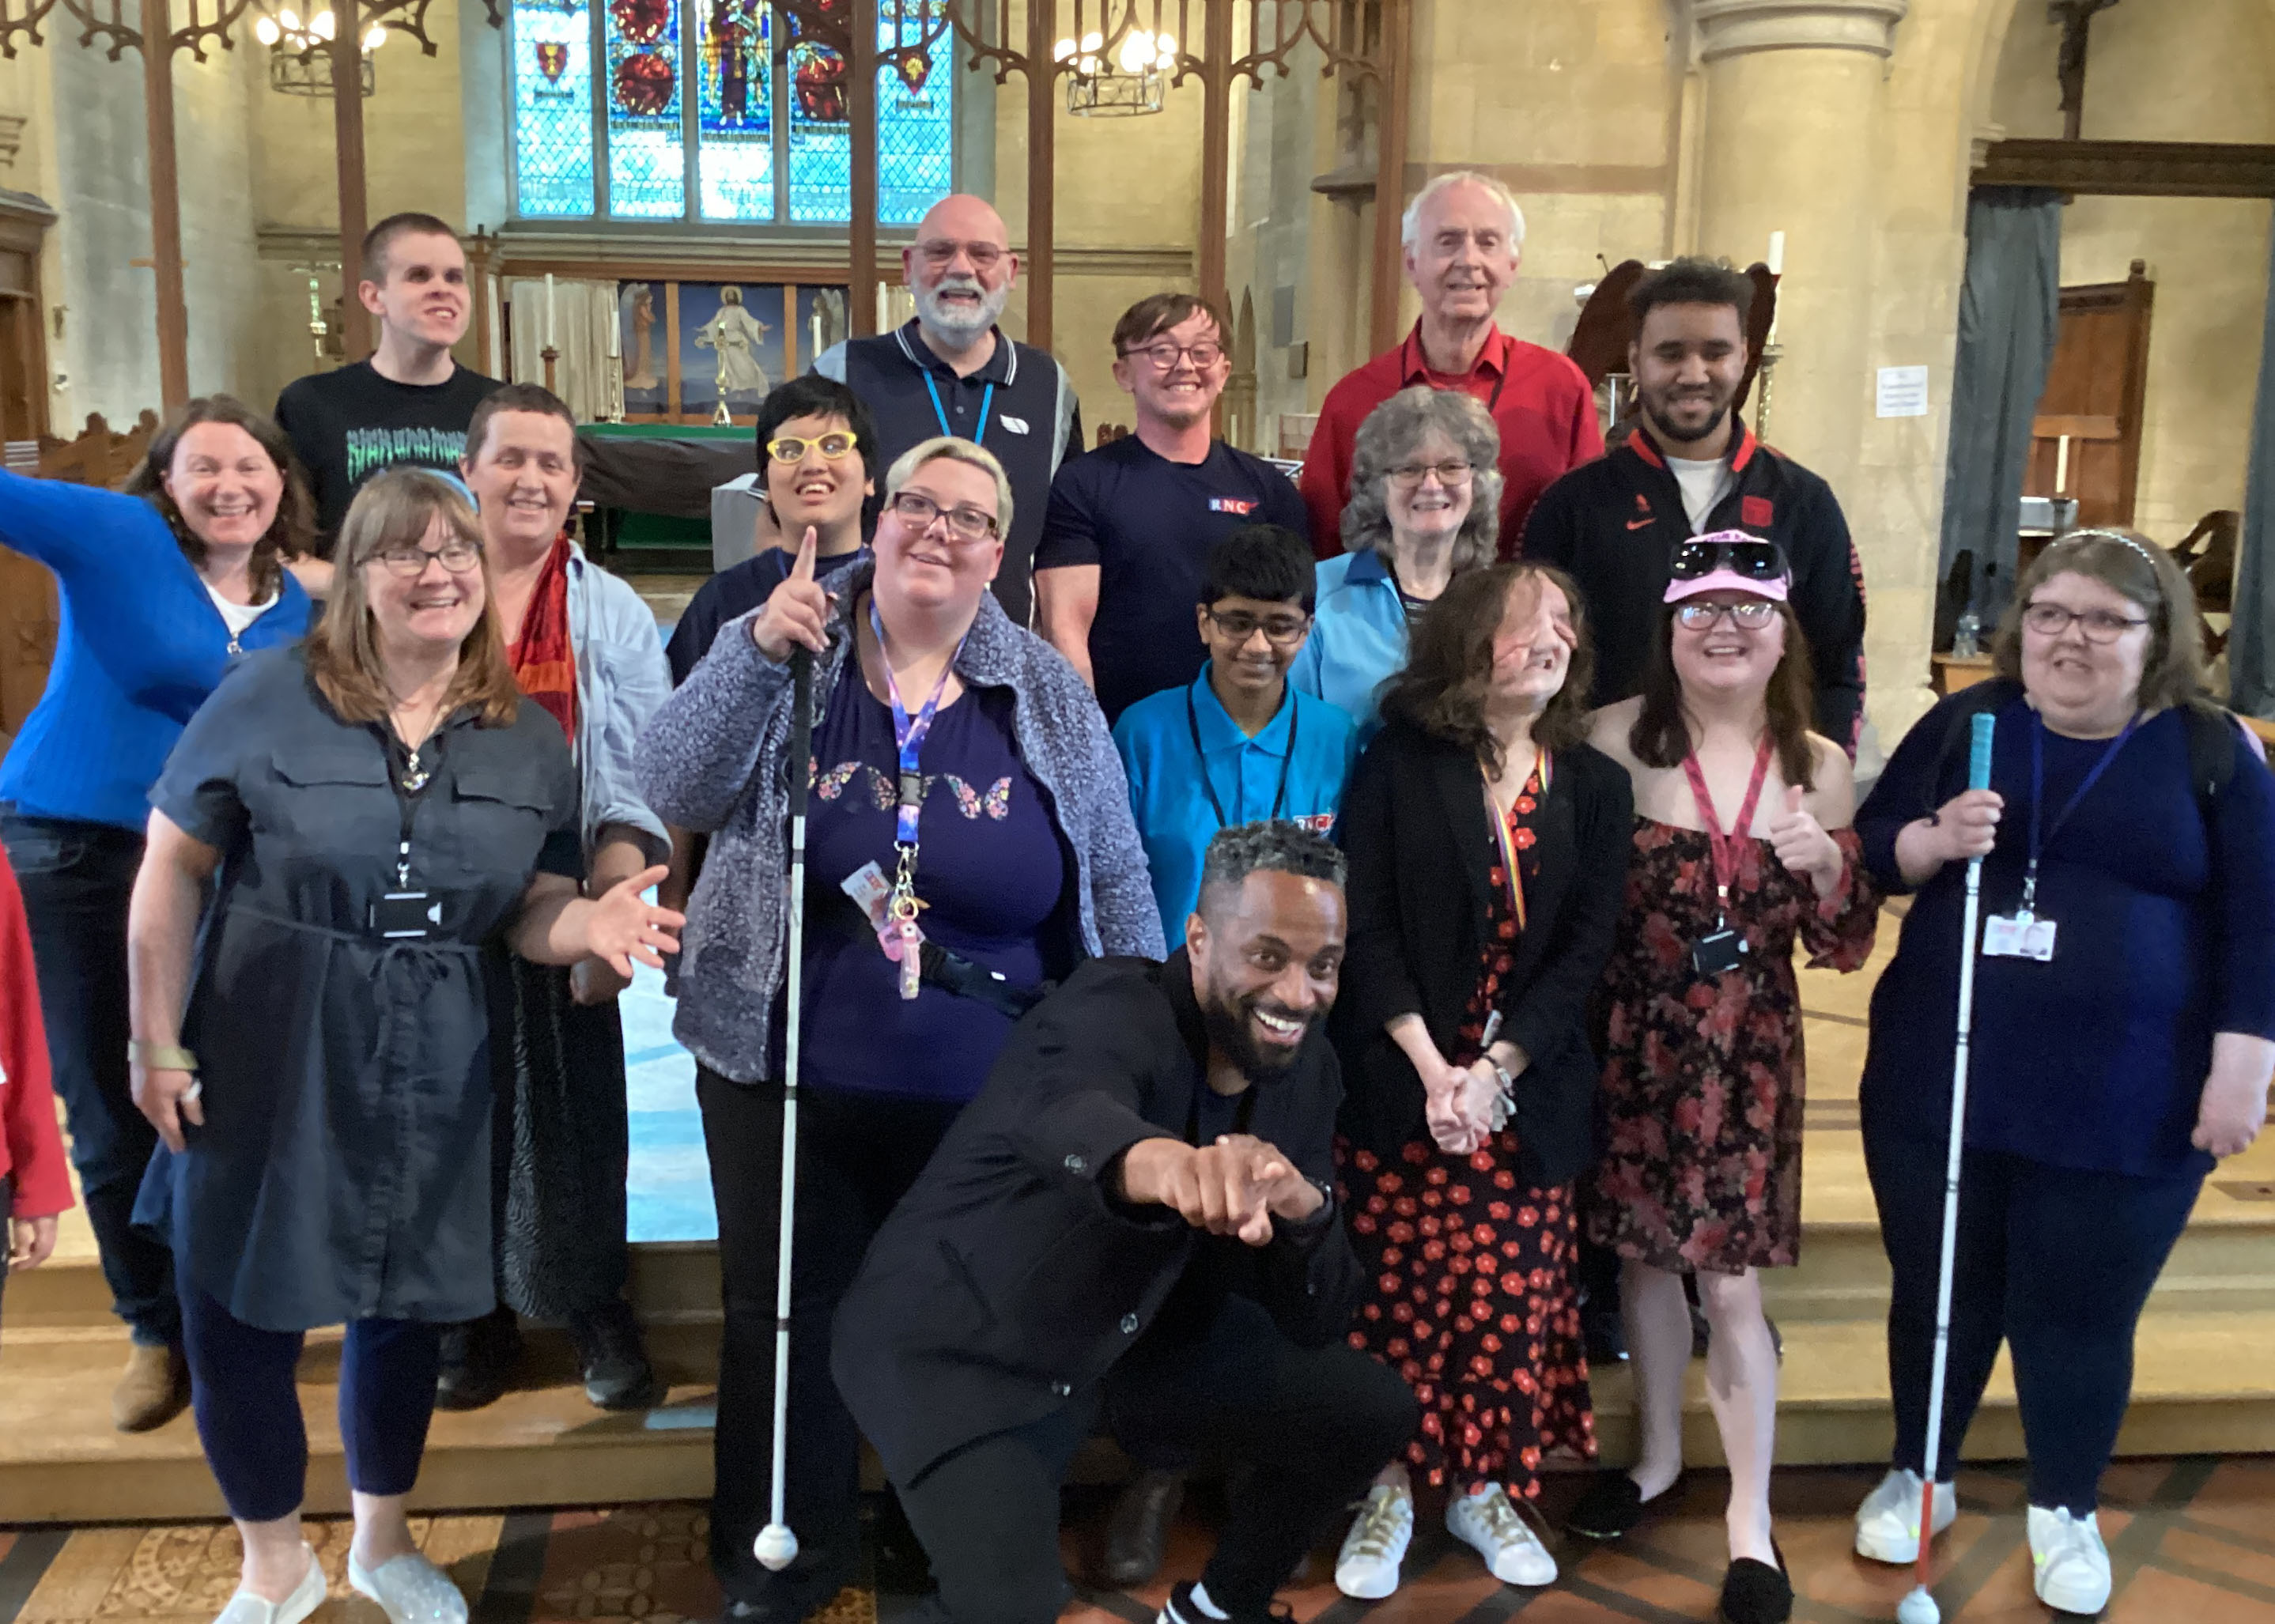 RNC’s Wellbeing Choir performs with world-renowned choral director